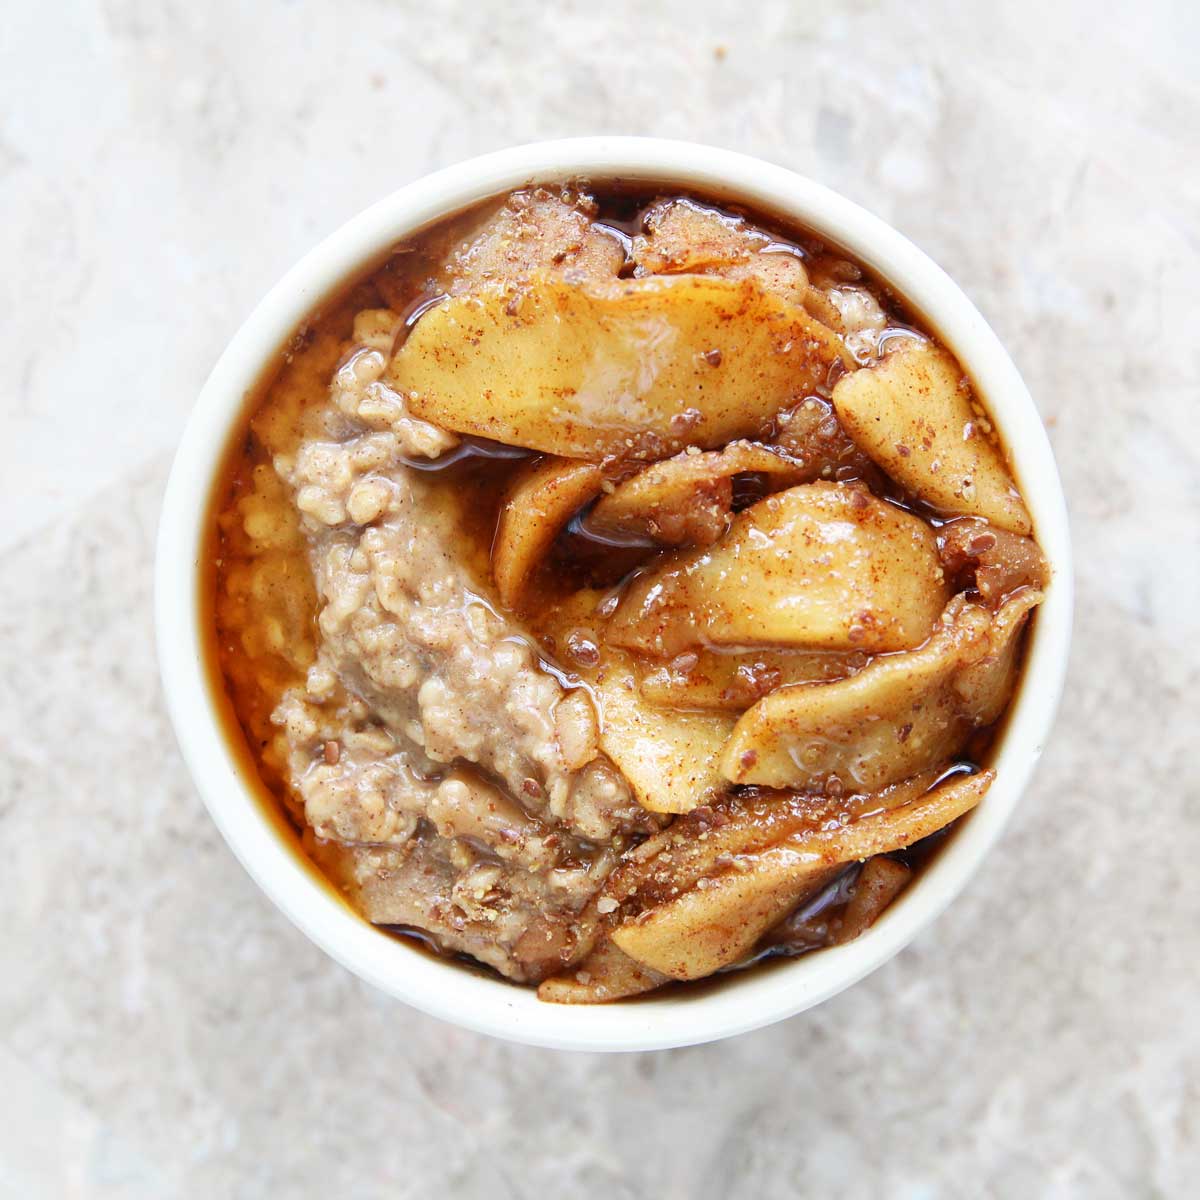 How to Make Healthy Apple Pie Oatmeal Bowl - Almond Joy Protein Bars